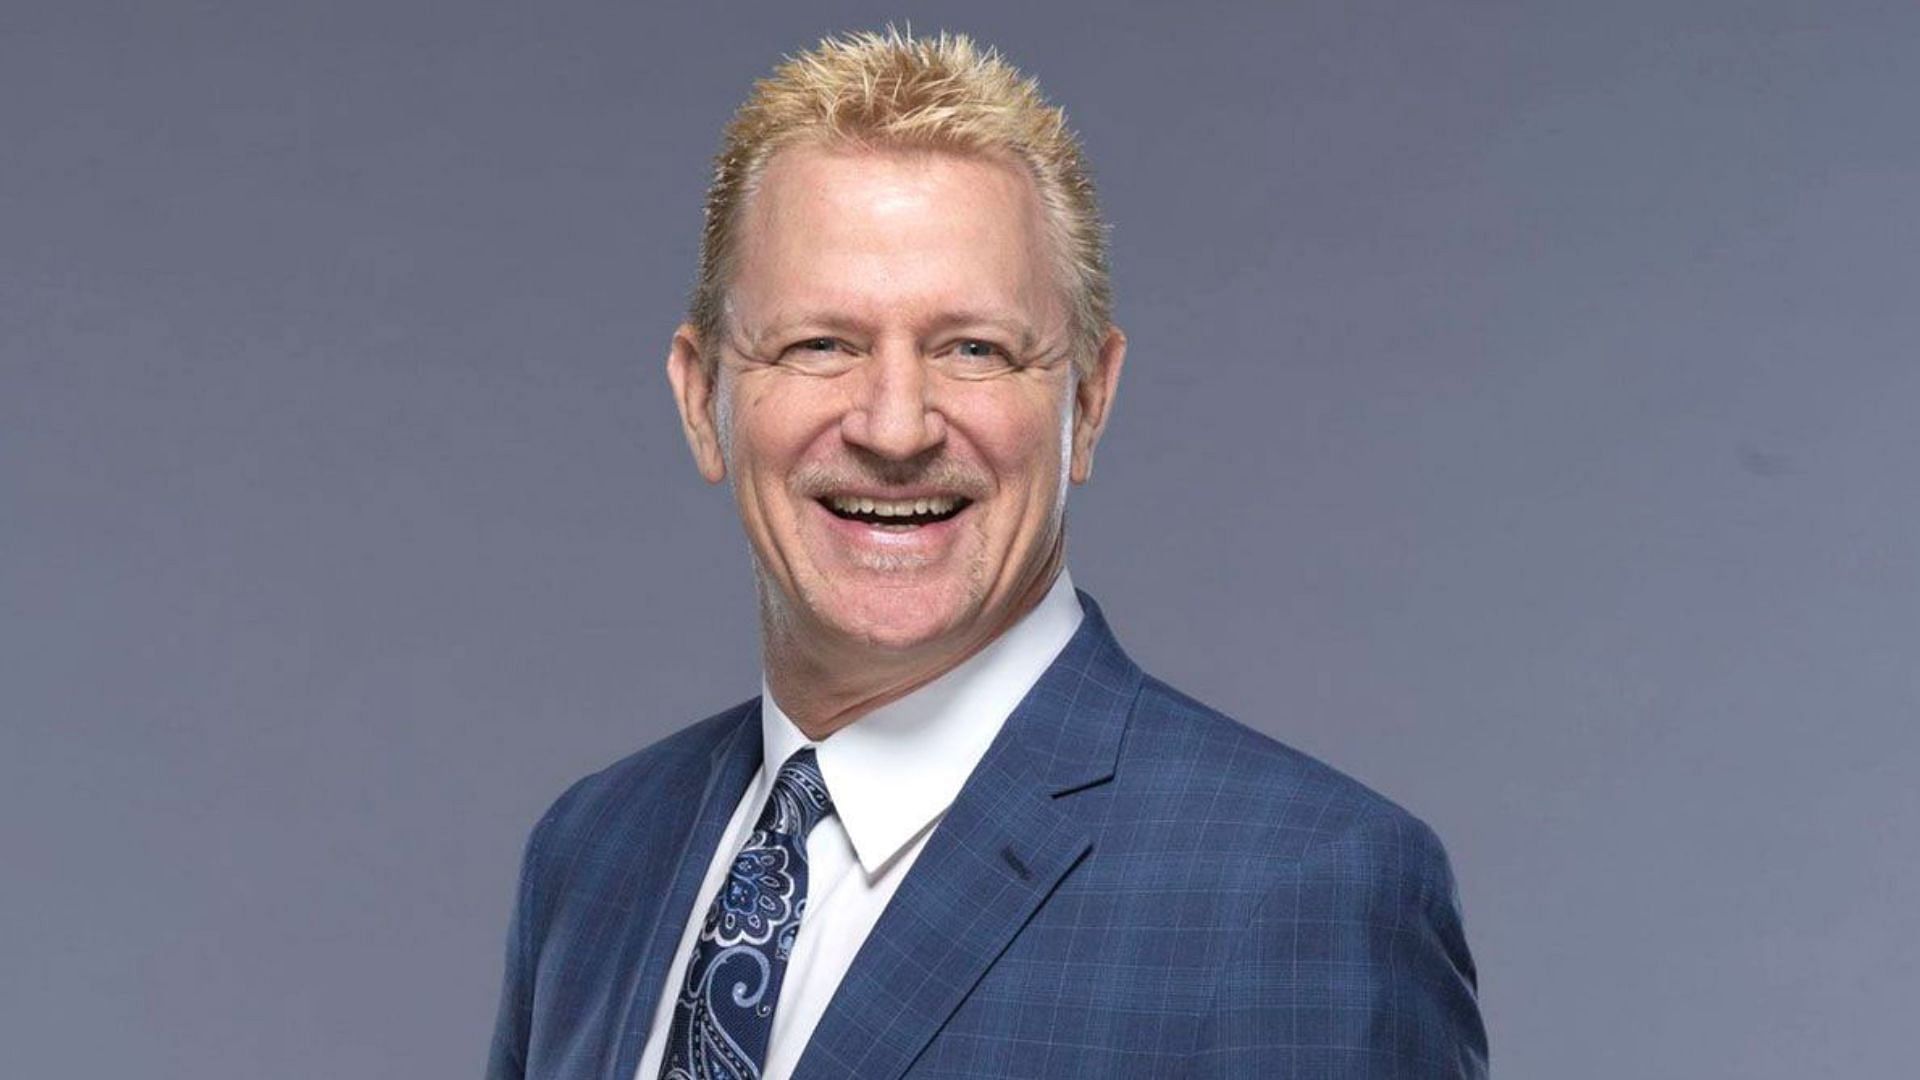 Jeff Jarrett will be a special guest referee at SummerSlam